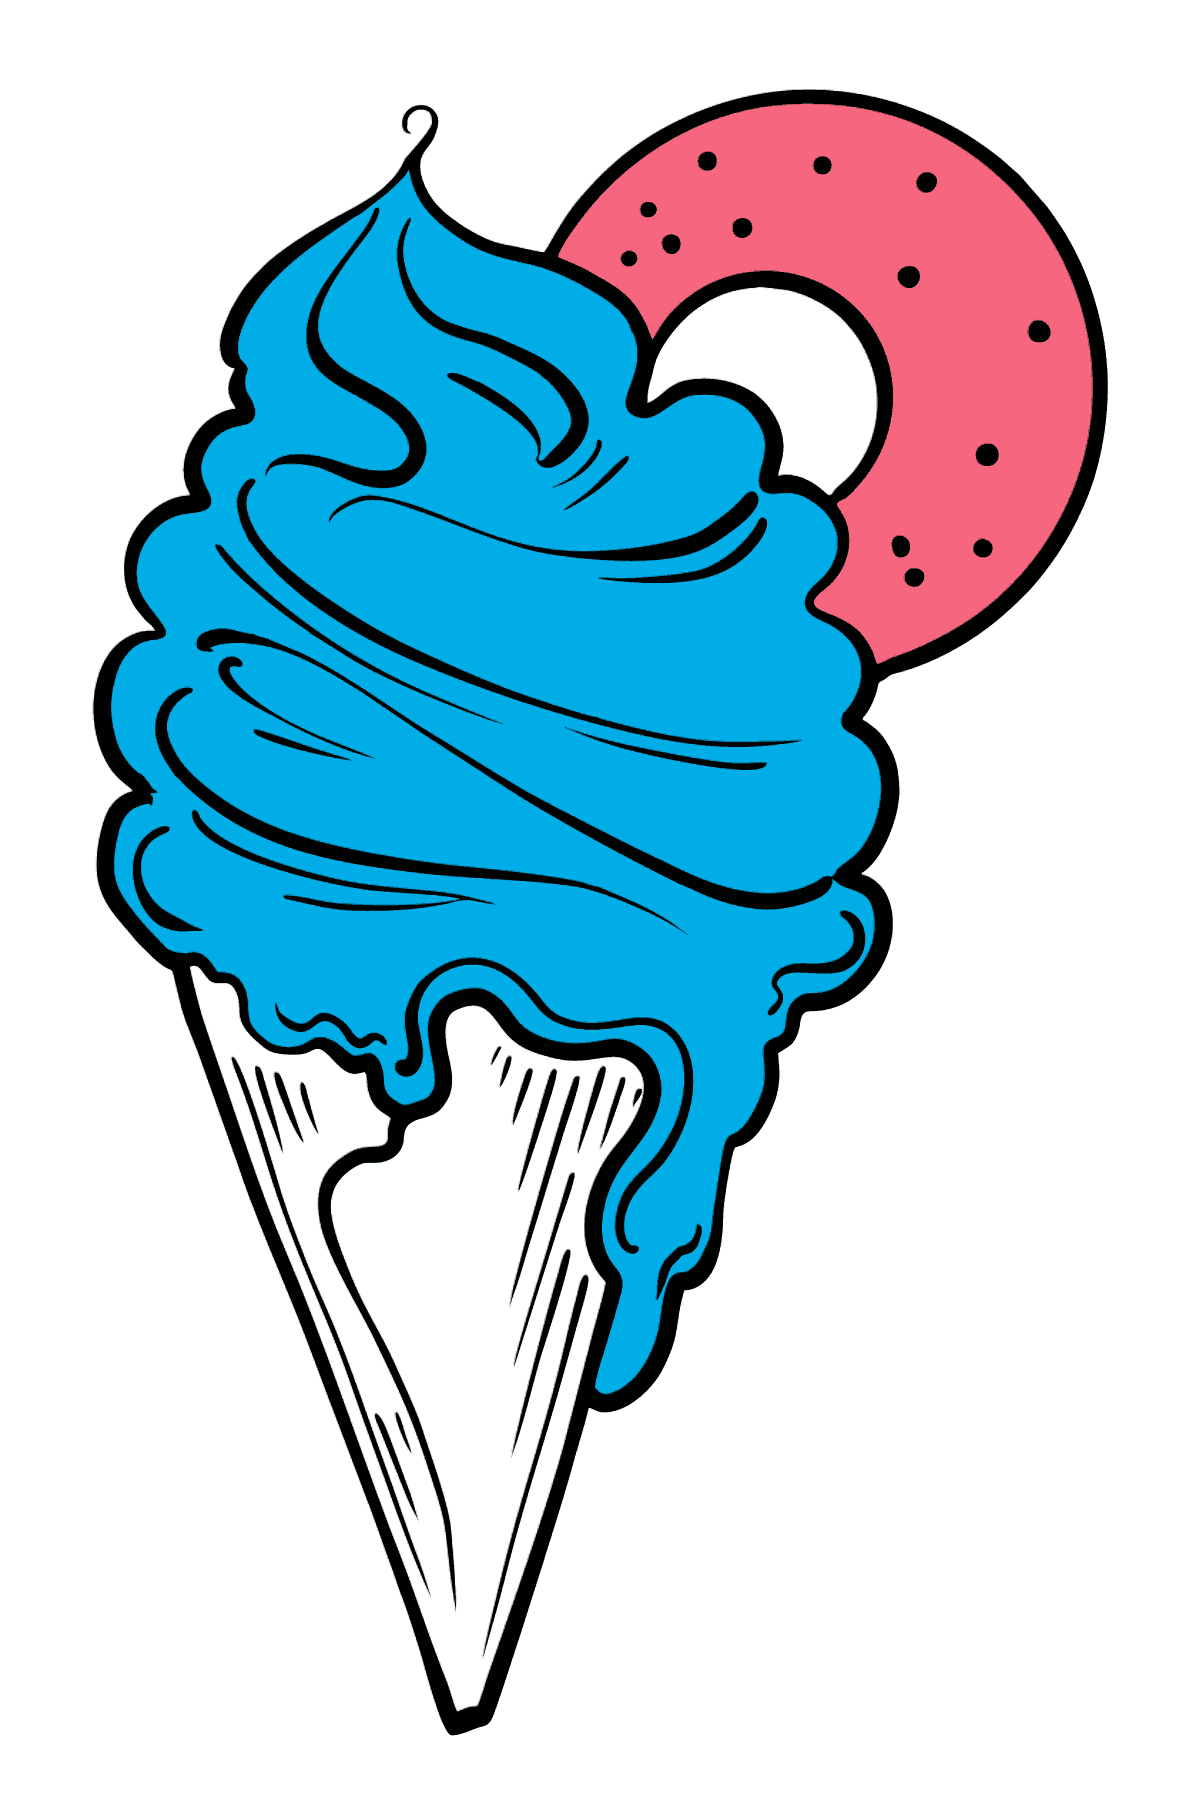 Ice Cream Cone and Pink Lollipop coloring page - Coloring Pages for Kids